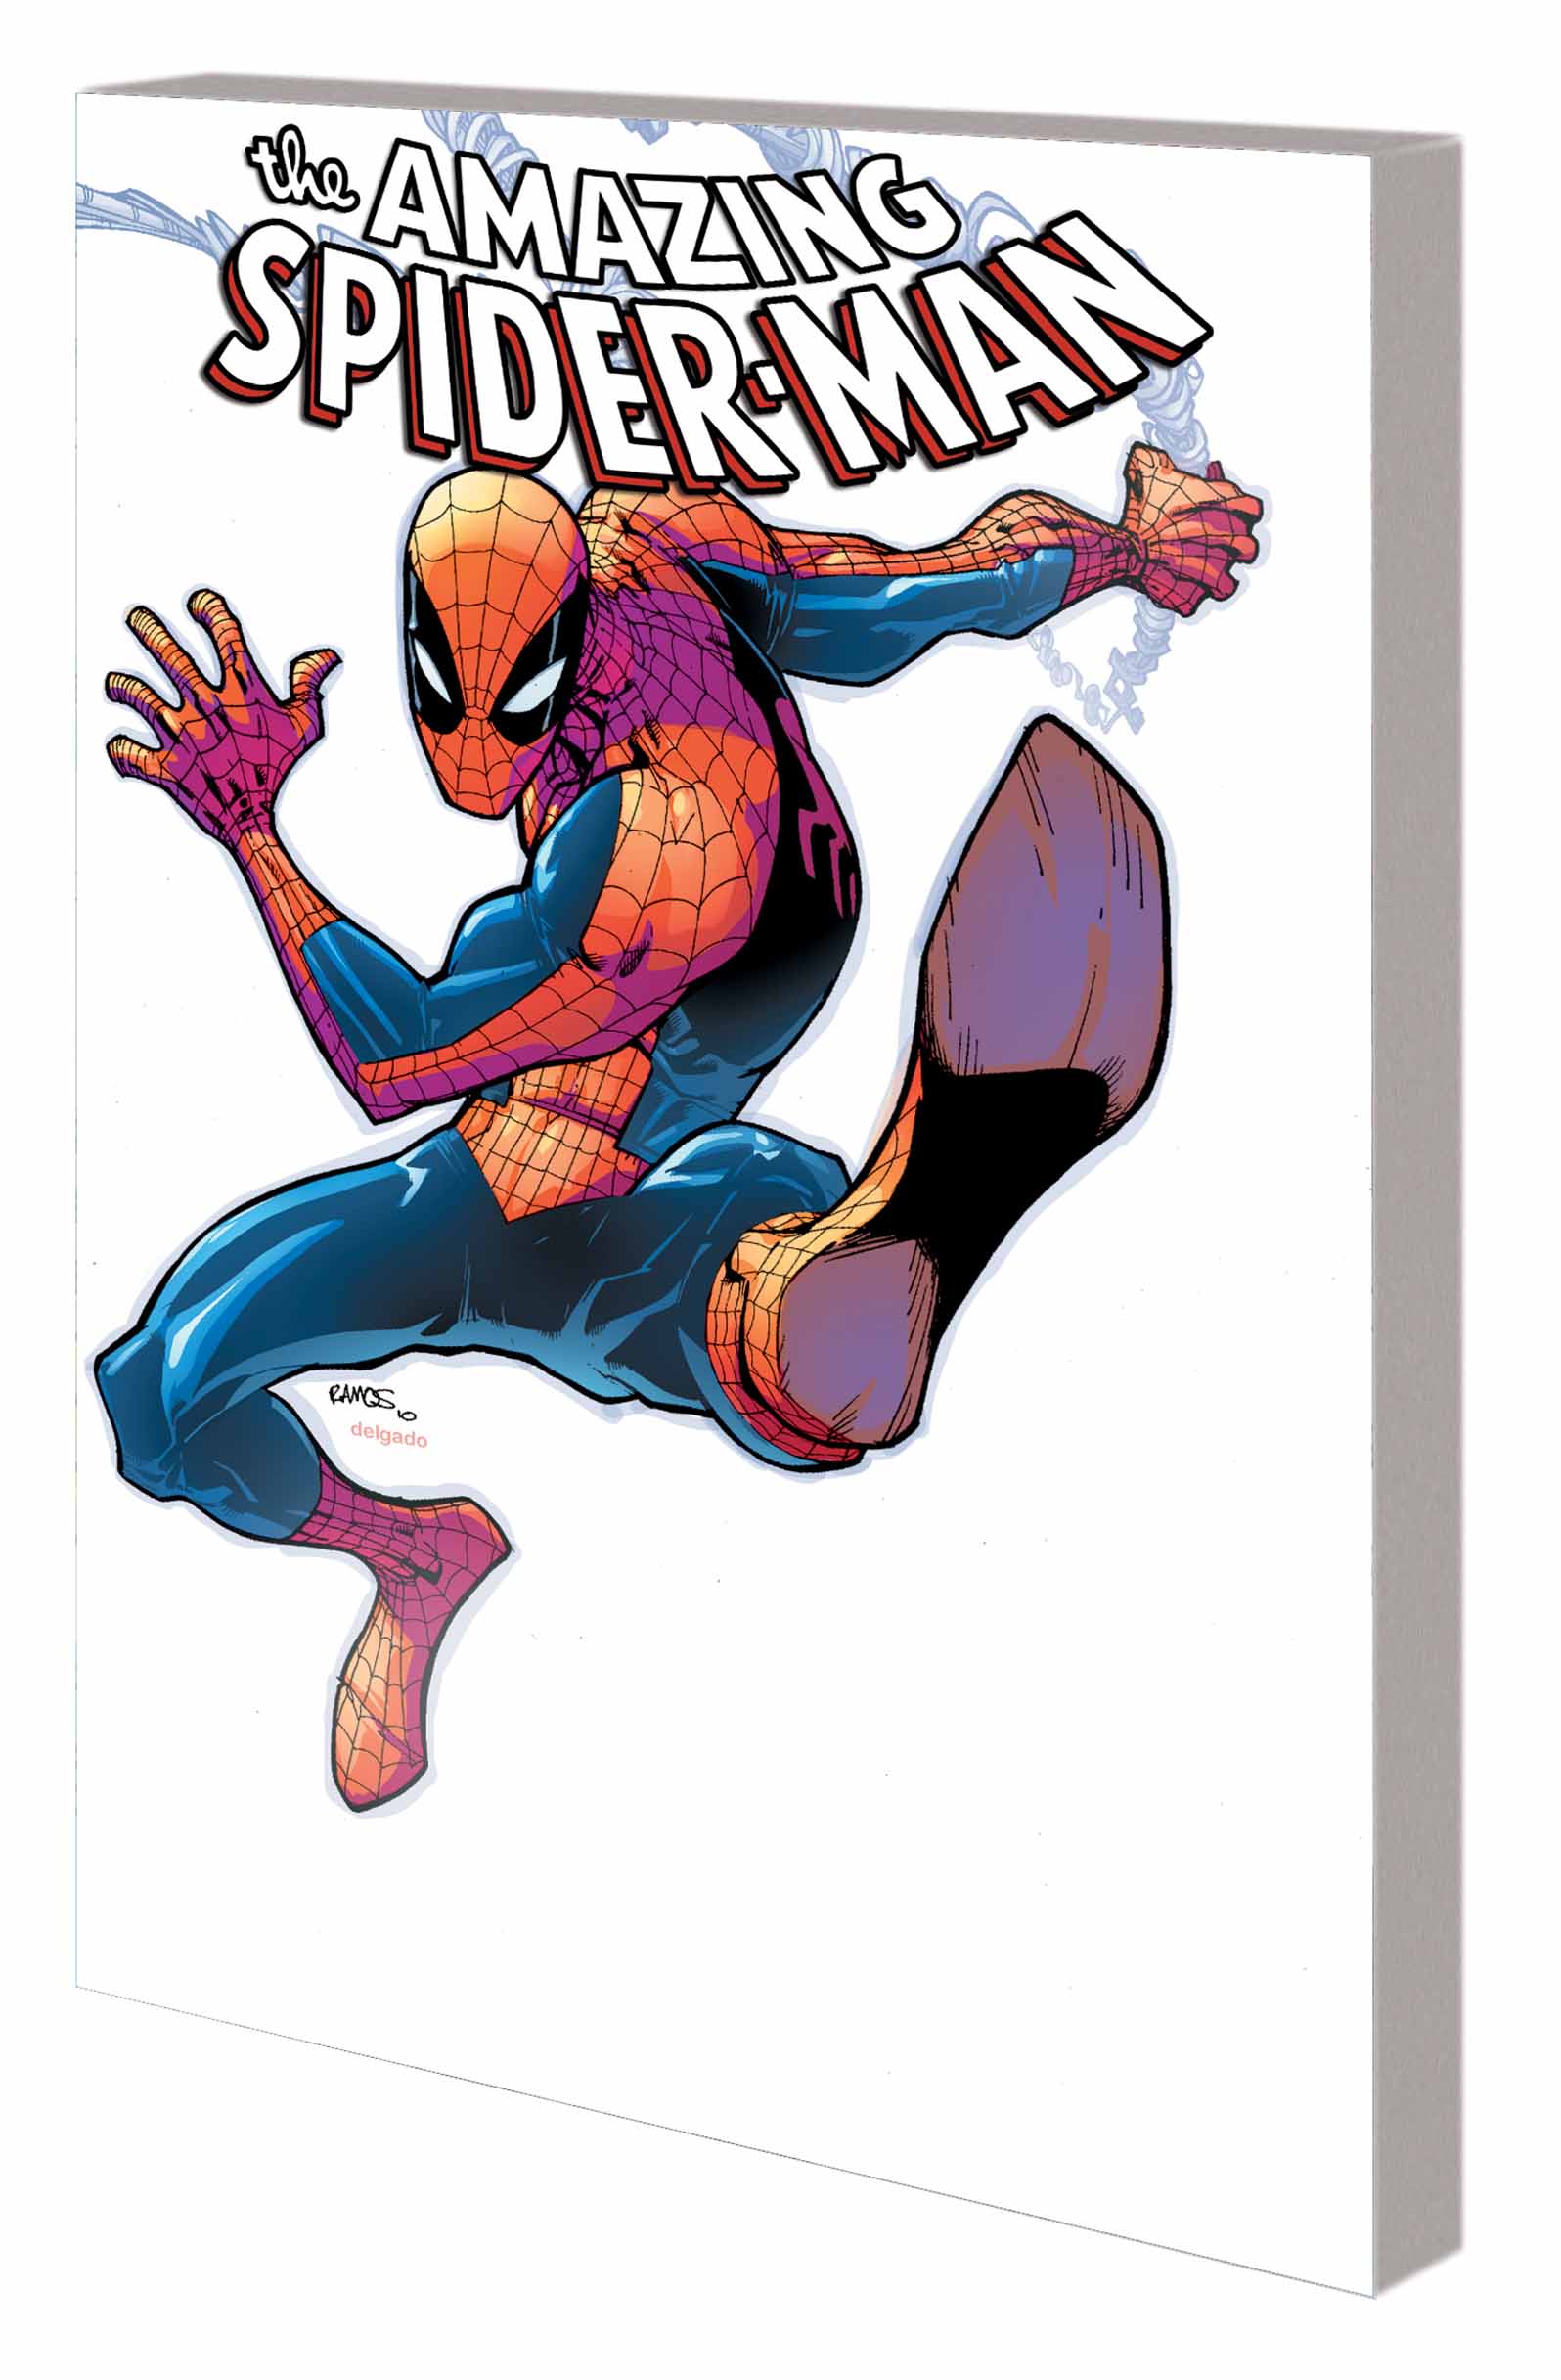 Spider-Man: Big Time - The Complete Collection (Trade Paperback)